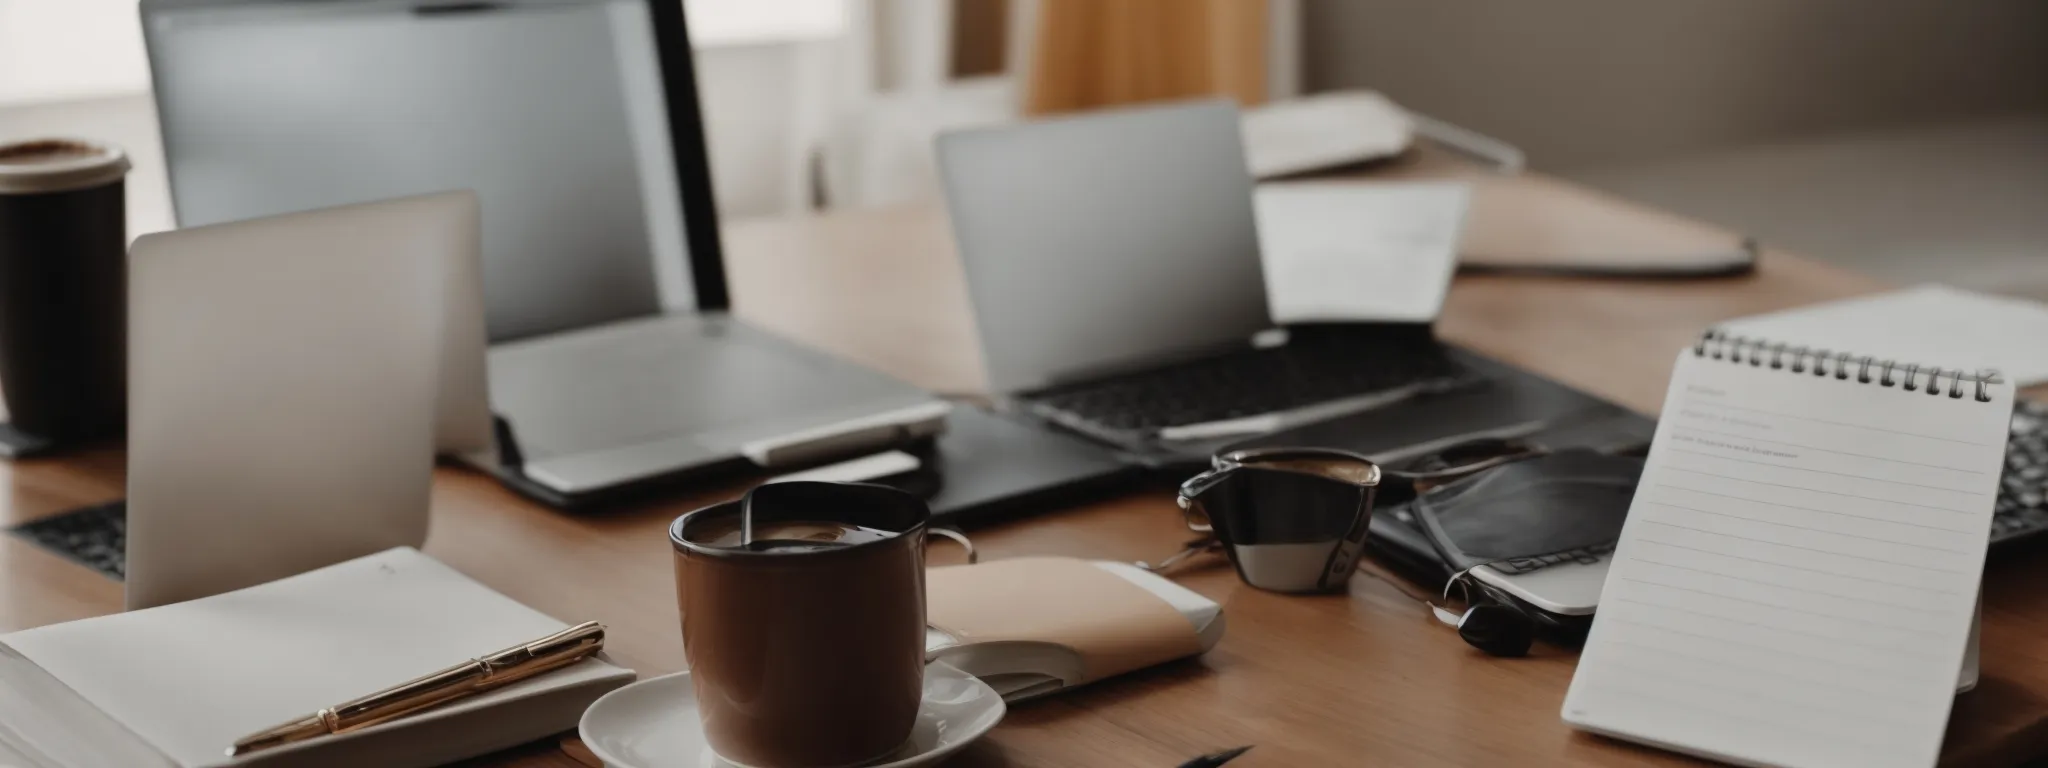 a laptop, a notepad, and a cup of coffee on a desk symbolize seo work for increasing site authority through backlinks.